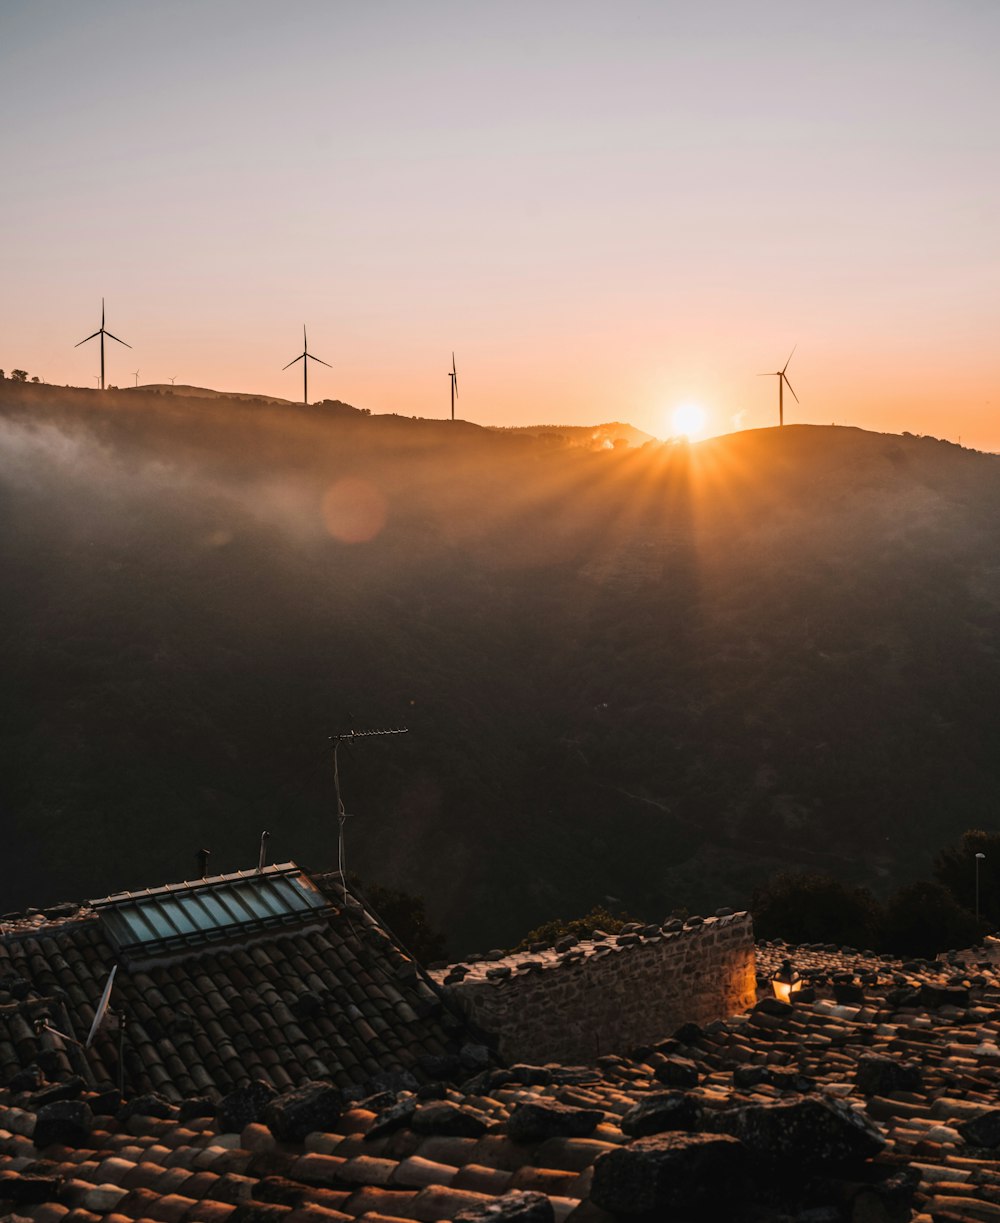 the sun is setting over a mountain with windmills in the background